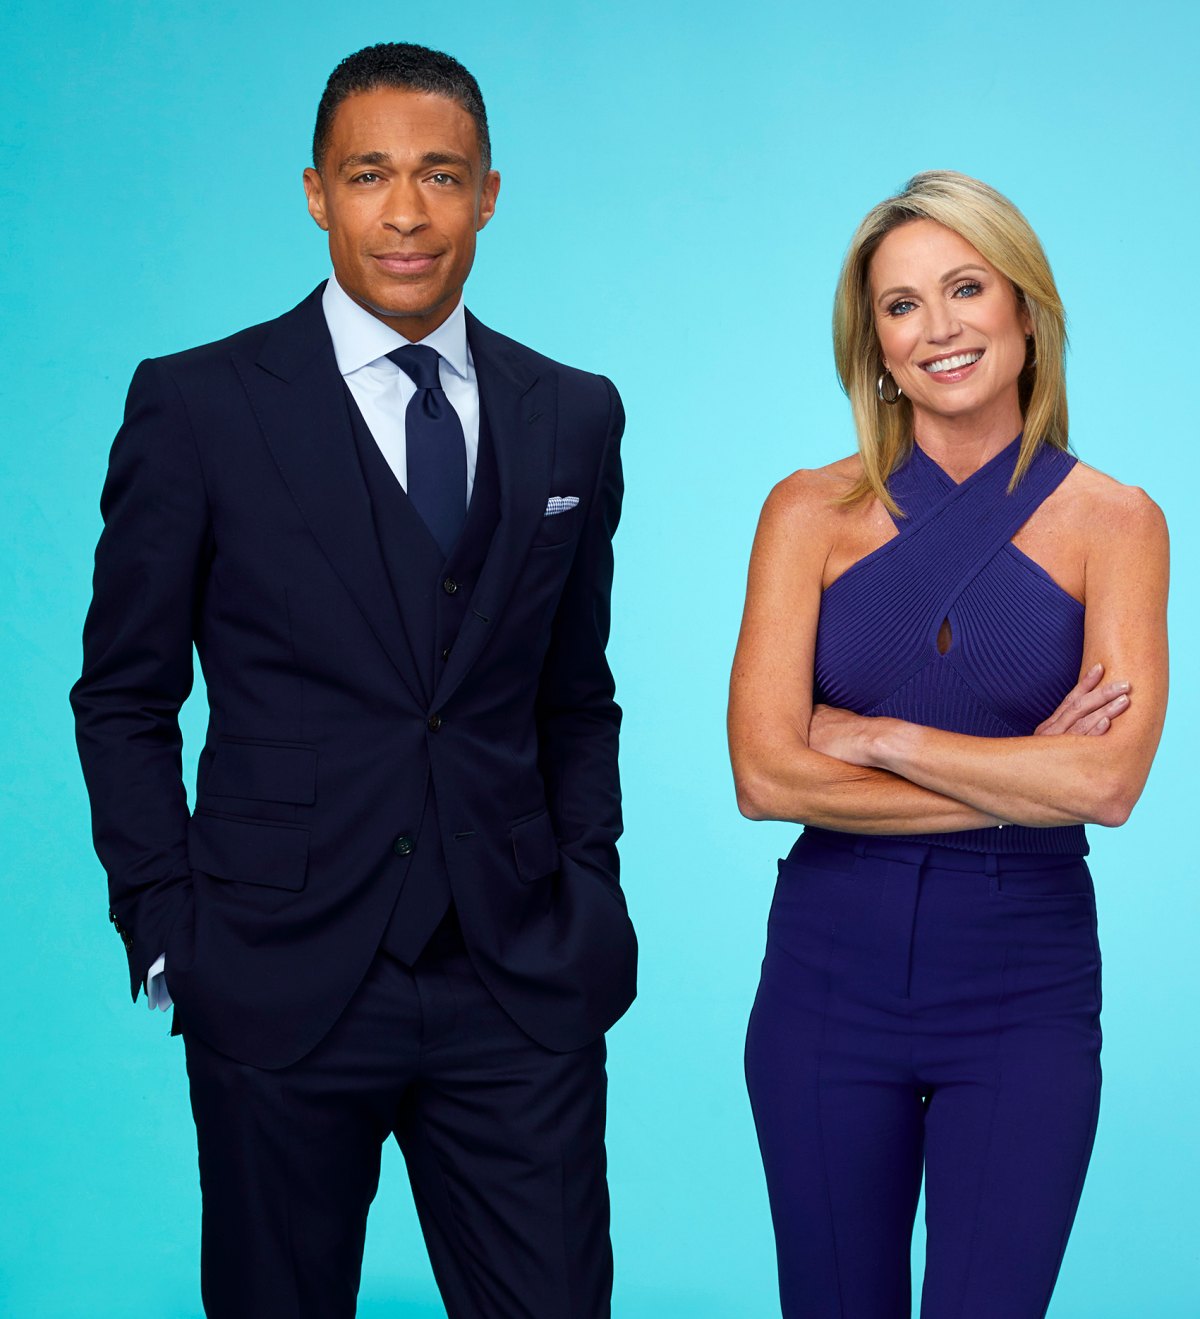 NEW: Good Morning America anchors benched amid romance scandal 